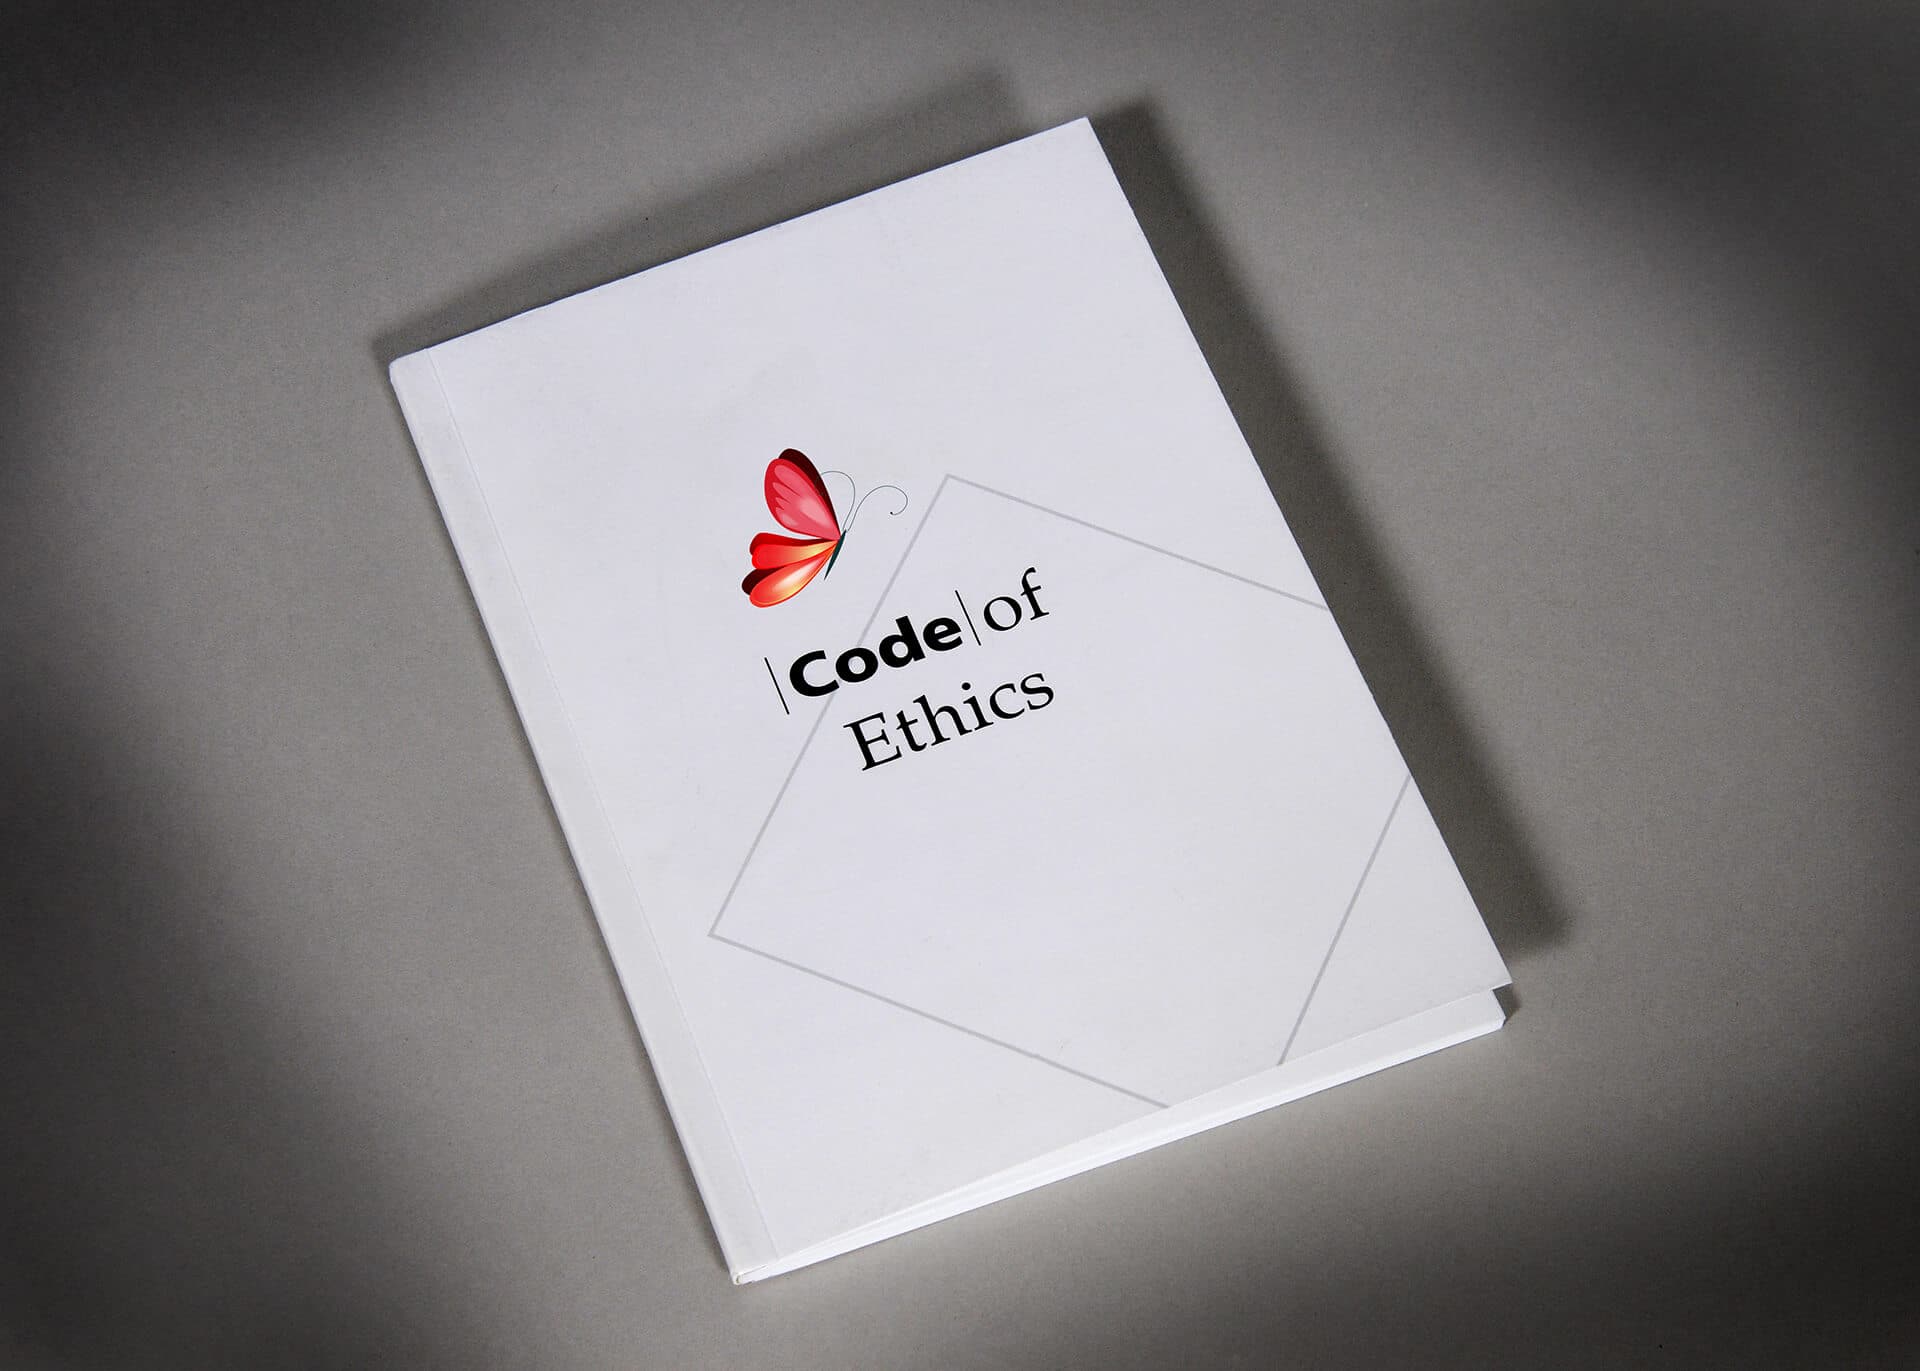 A manual that says code of ethics with the red Mariposa logo